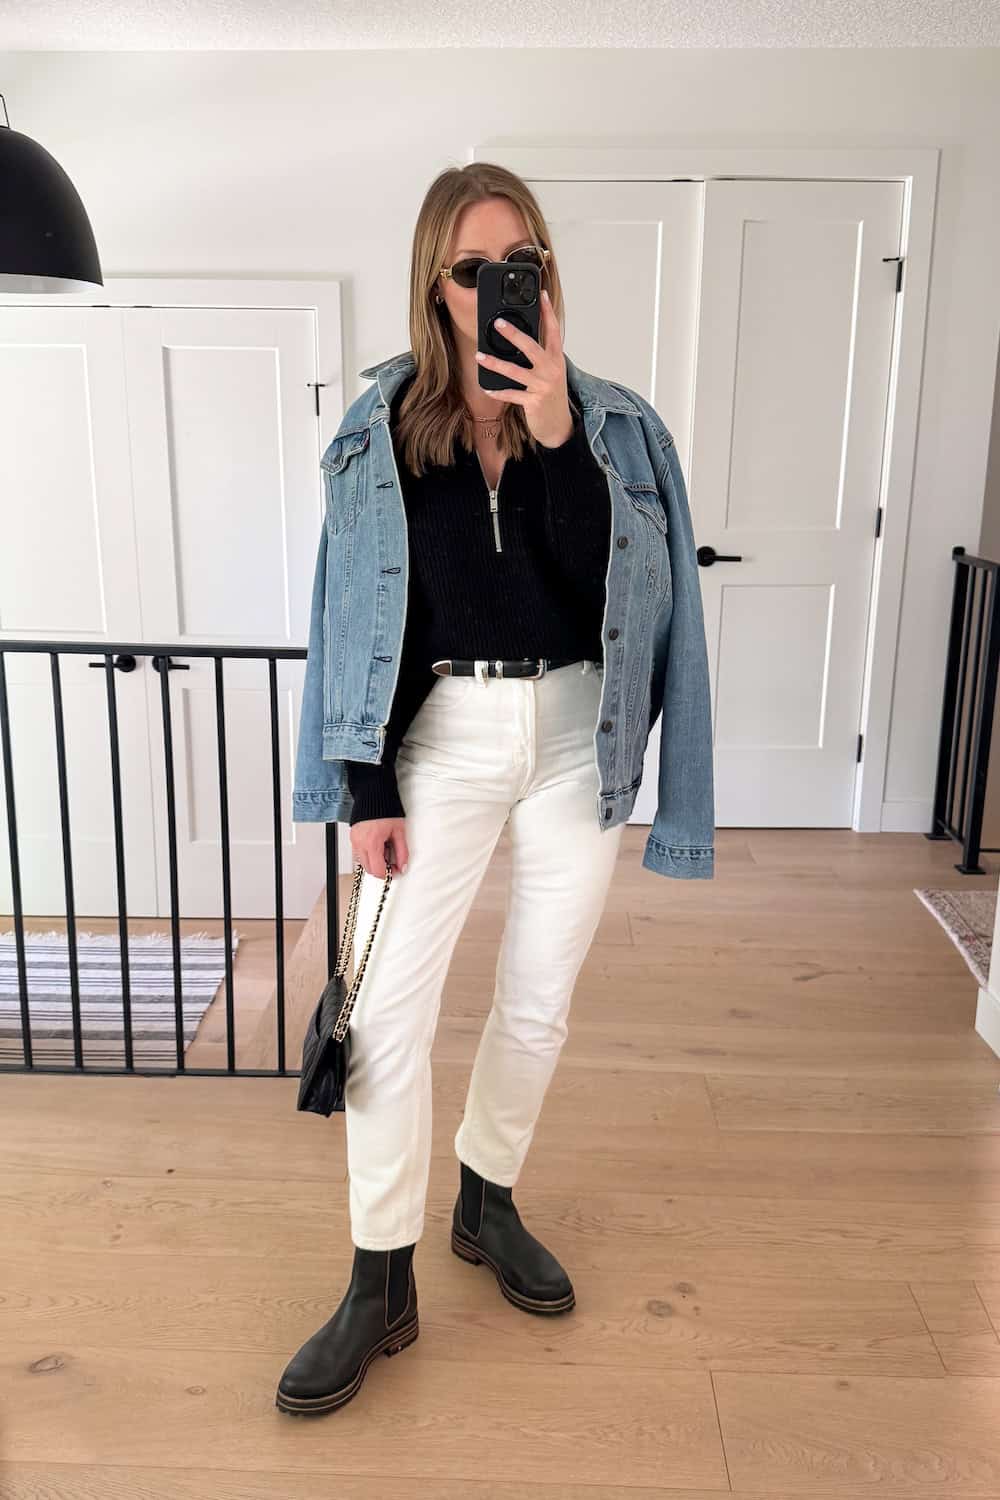 Christal wearing white jeans, black boots, a black quarter zip sweater and a denim jacket over her shoulders.